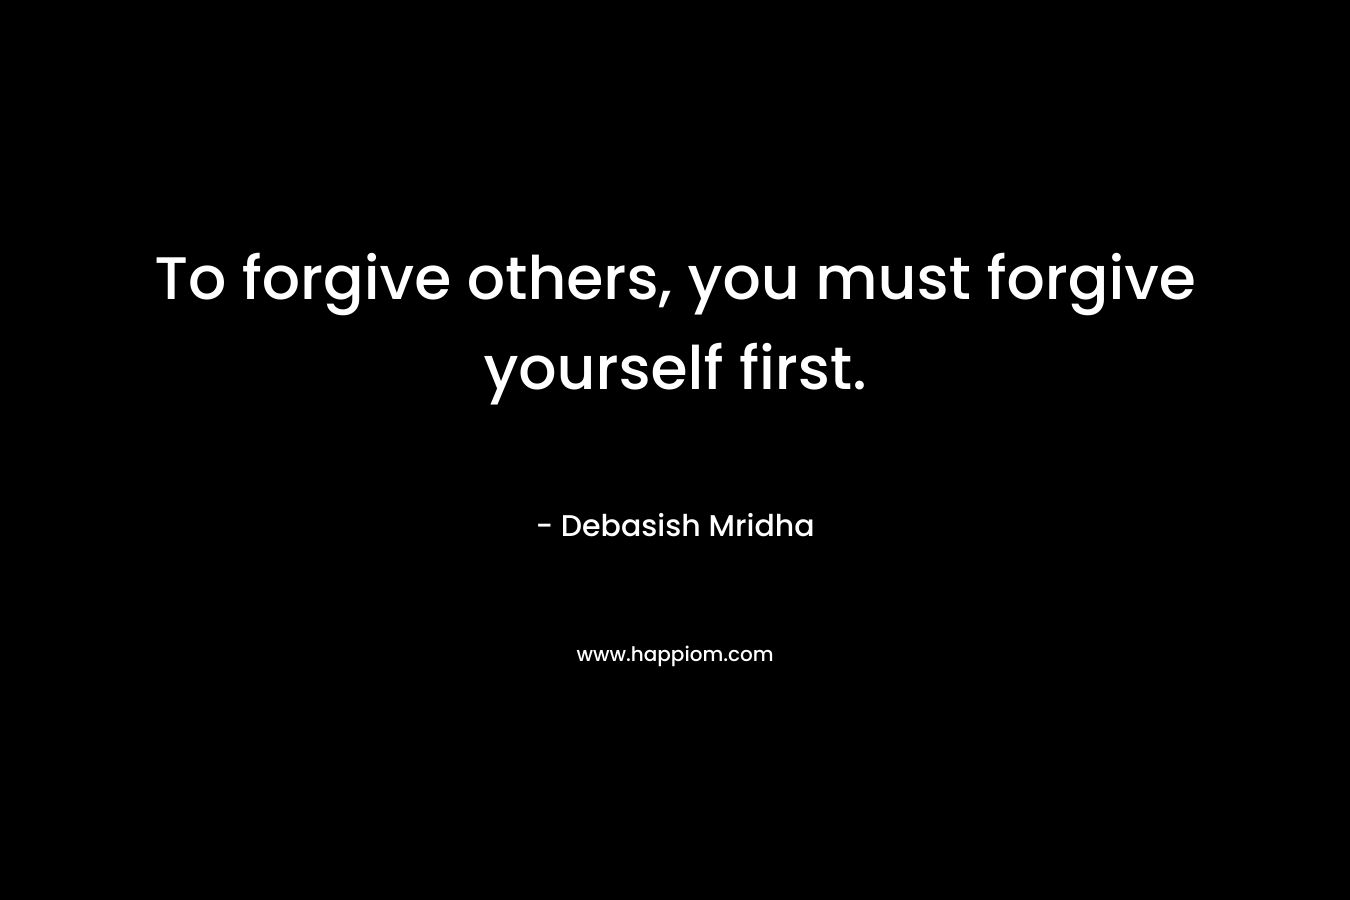 To forgive others, you must forgive yourself first.